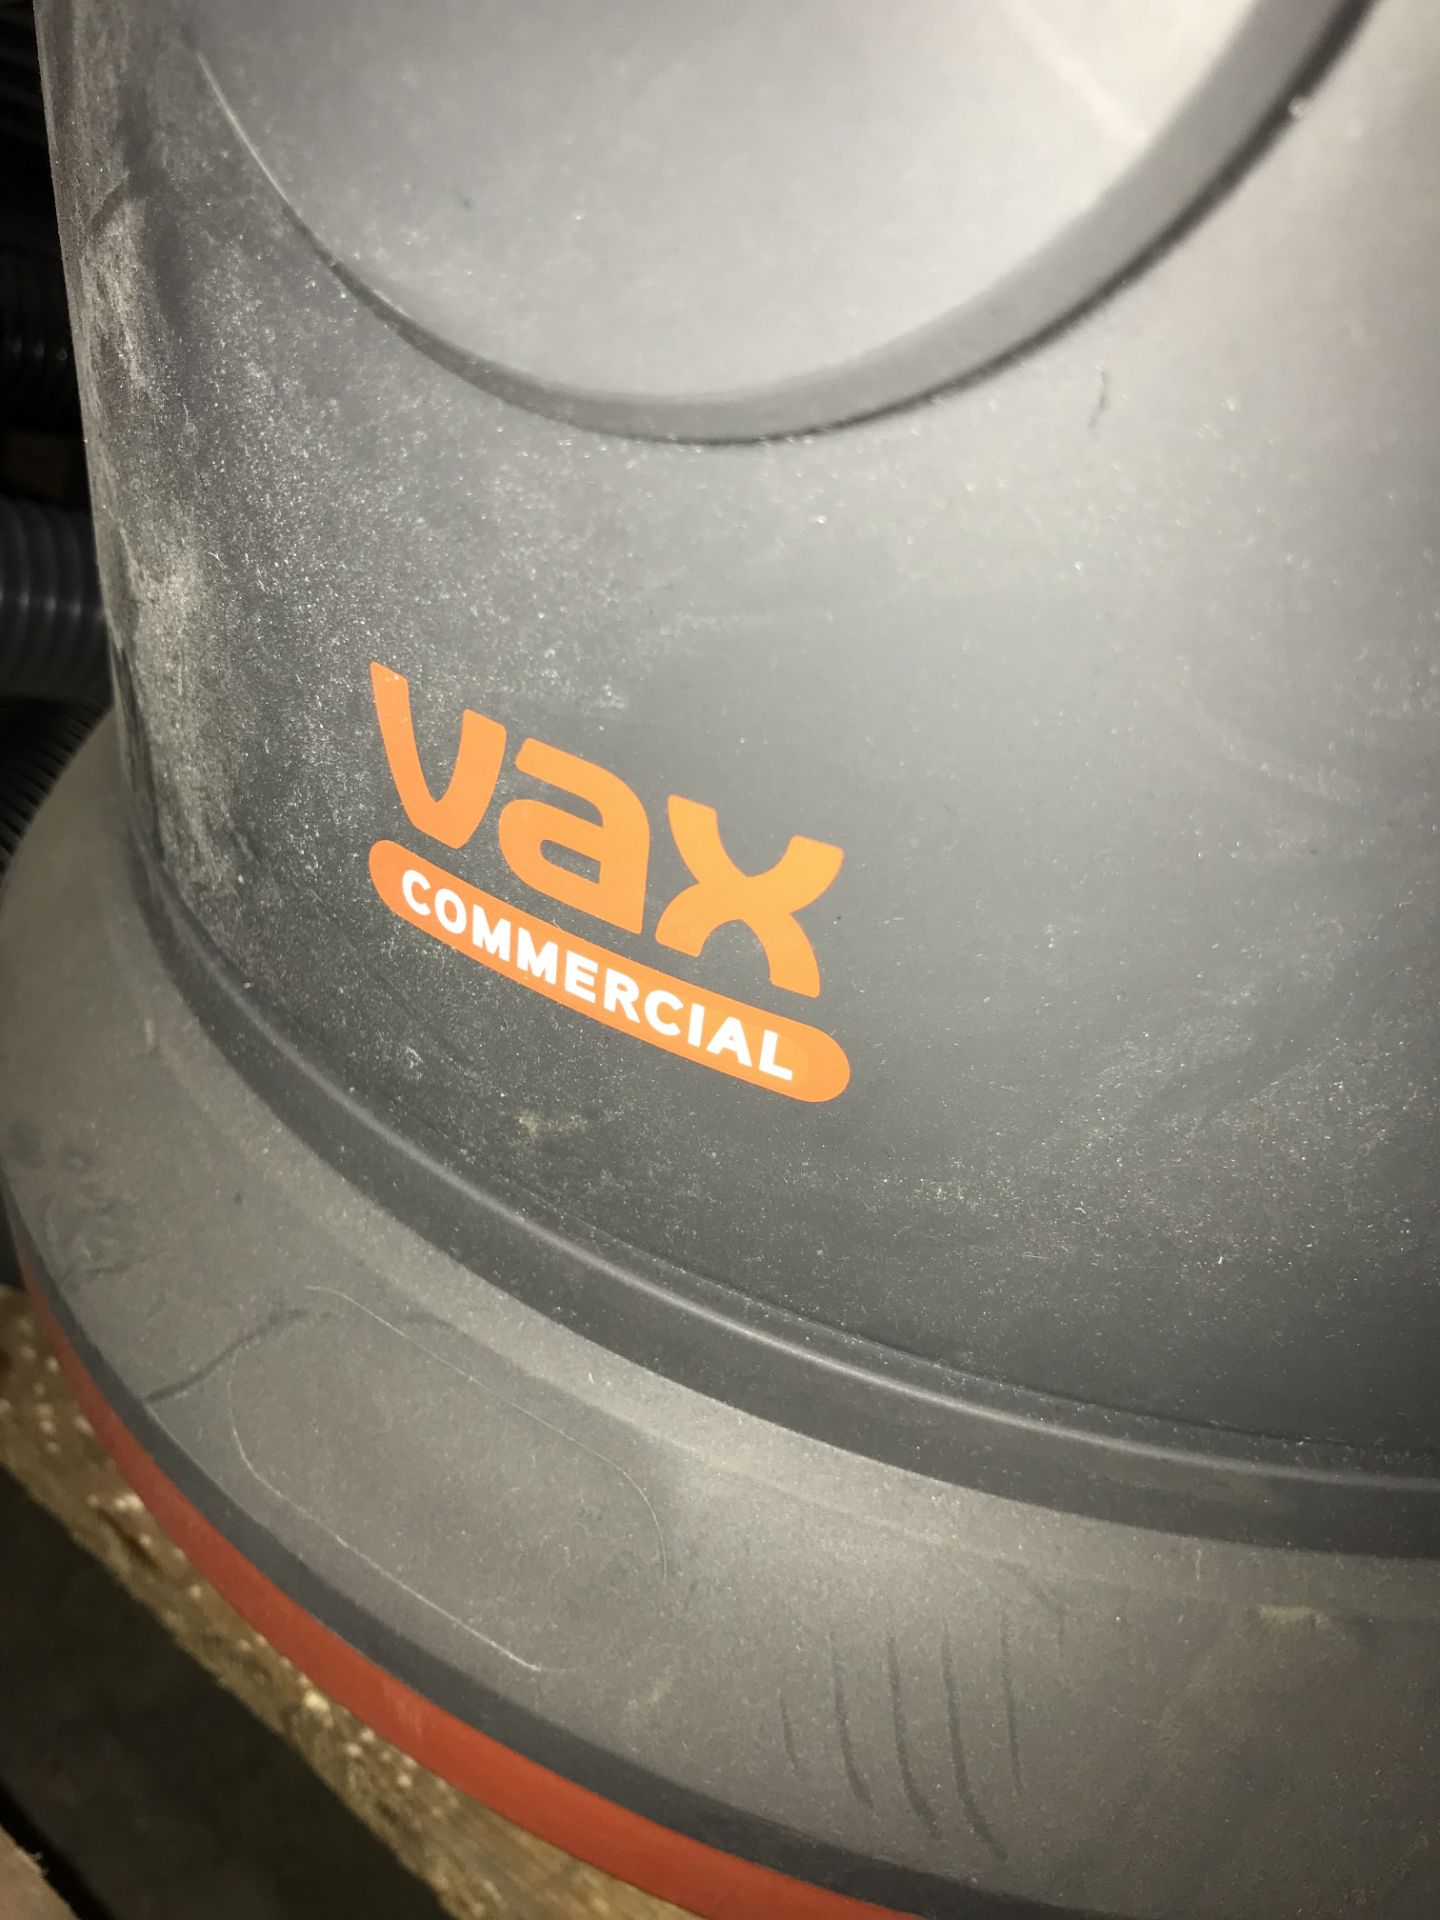 Vax Commercial Vacuum - Image 2 of 3